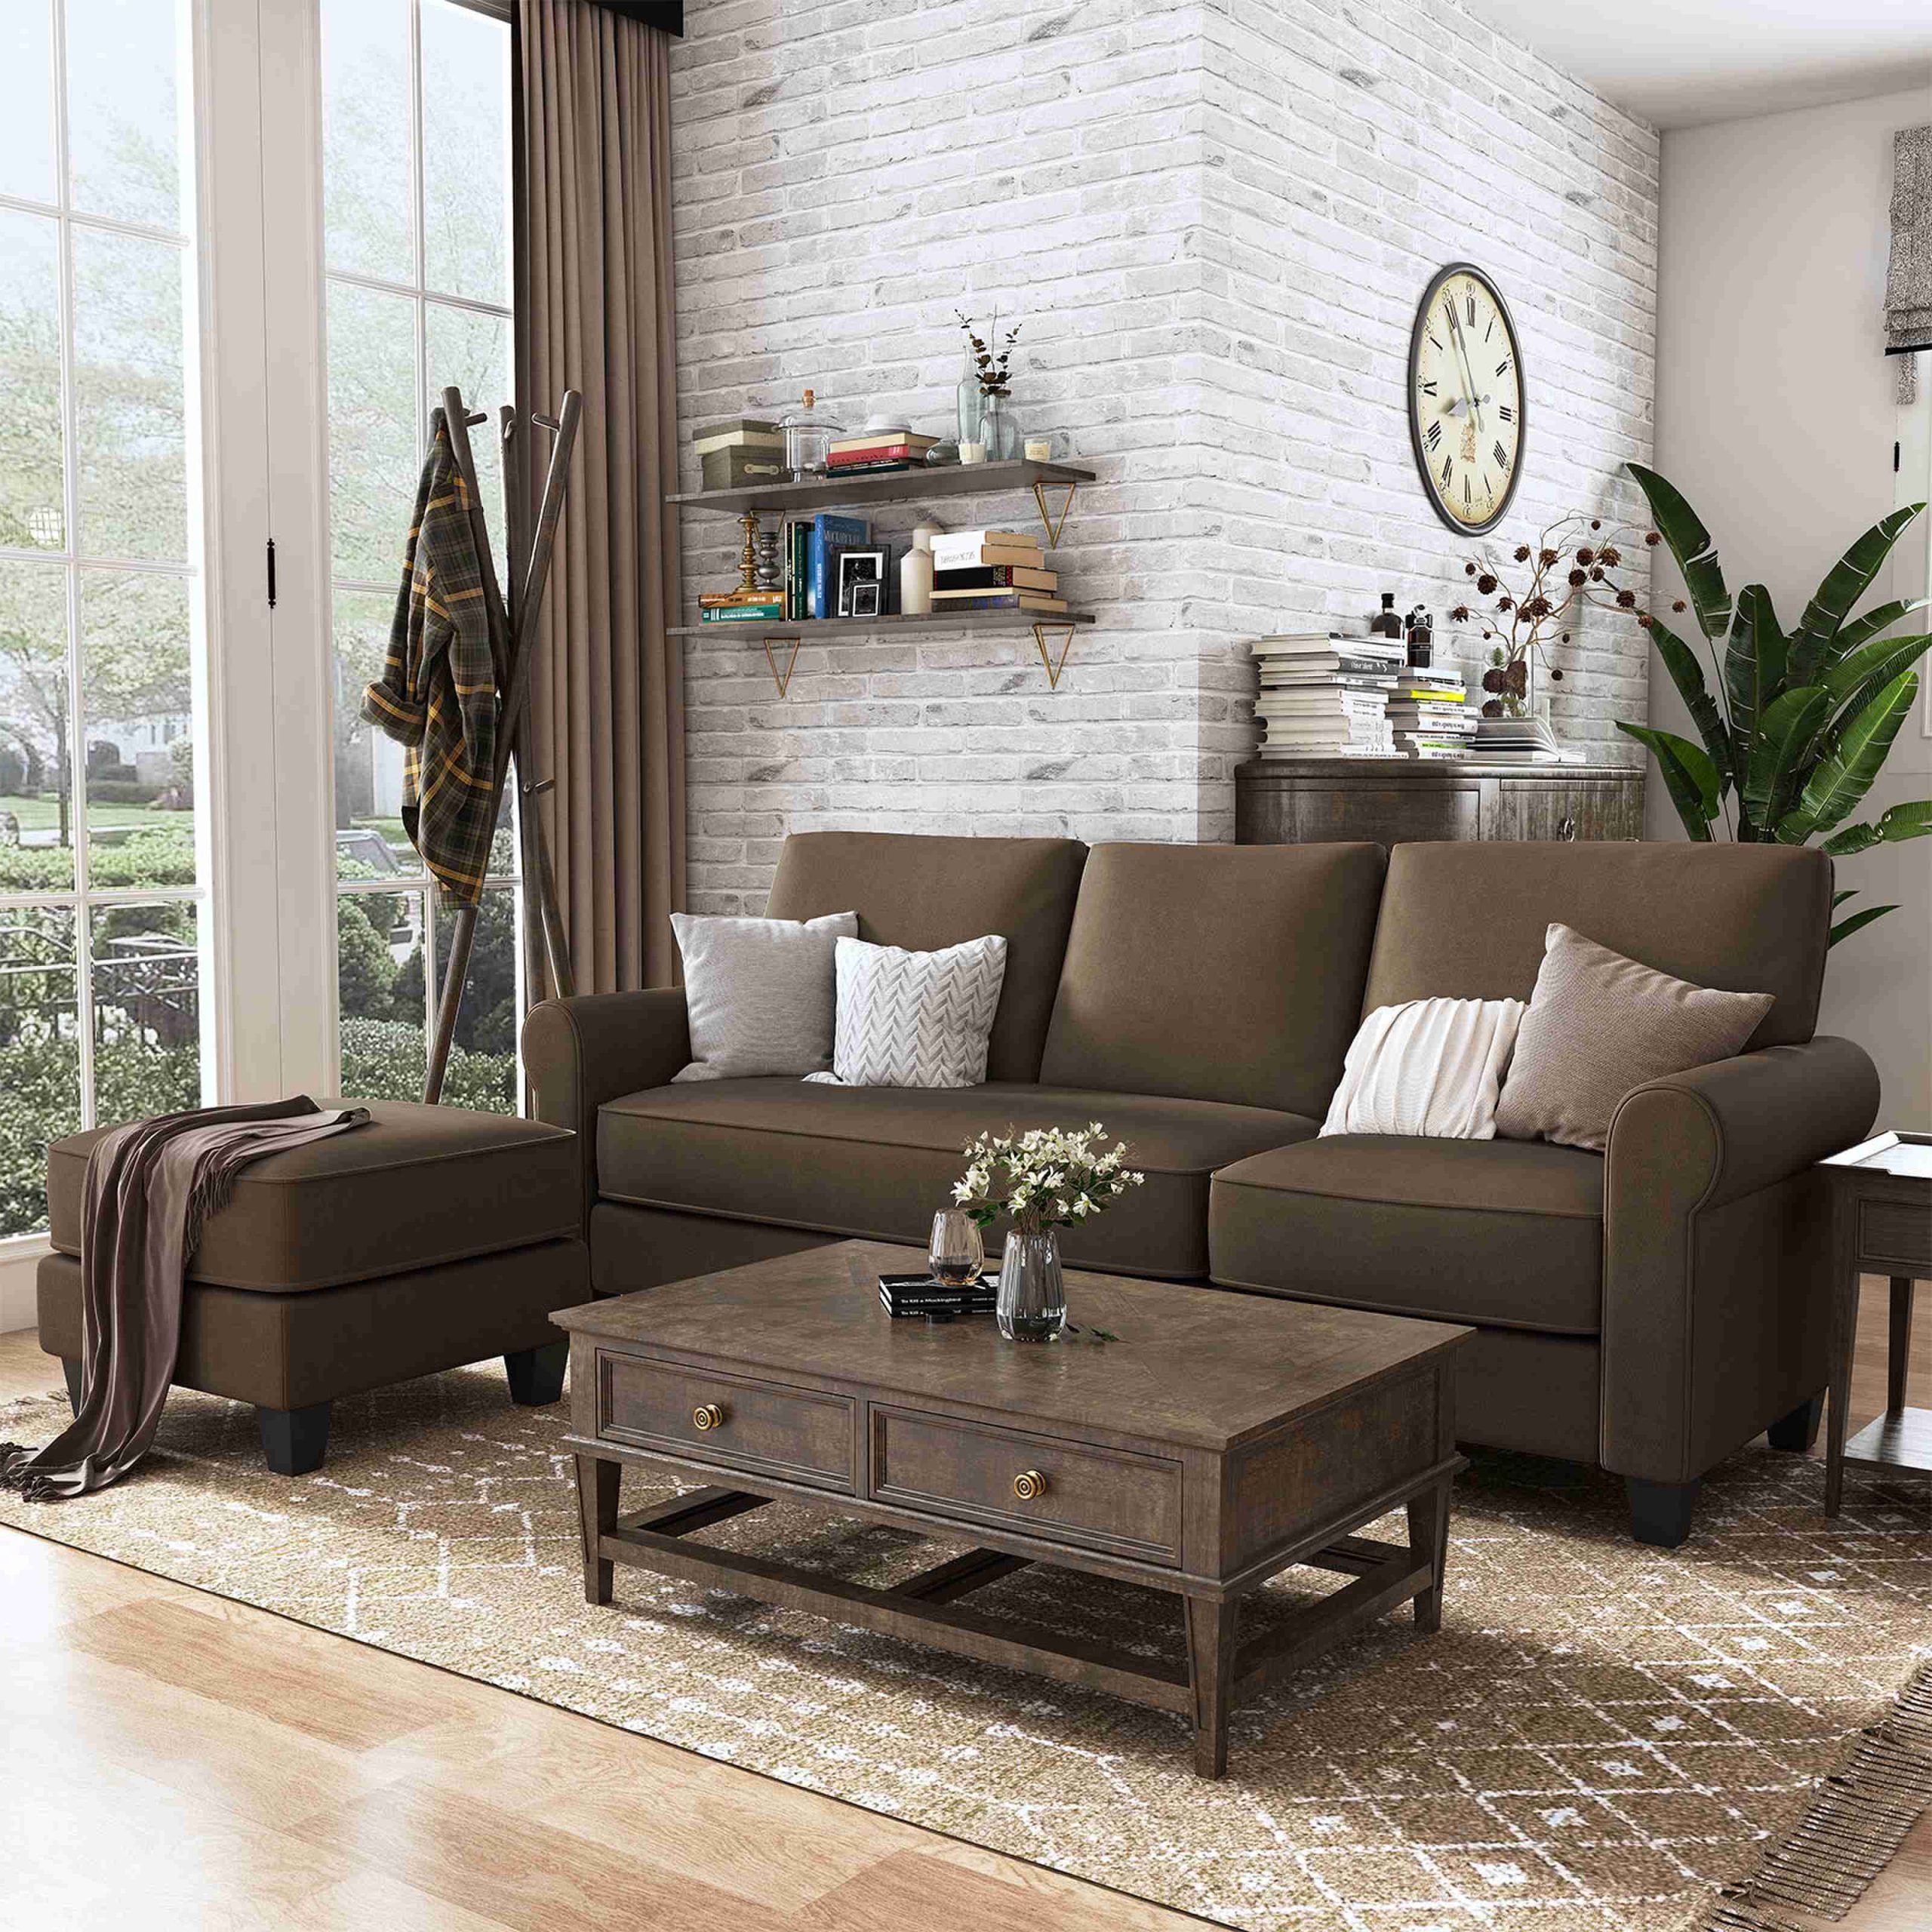 Nolany Convertible Sectional Sofa L Shaped Couch 3 Seat Sofa With Chaise, Chocolate  Brown – Walmart Within Sofas In Chocolate Brown (View 3 of 15)